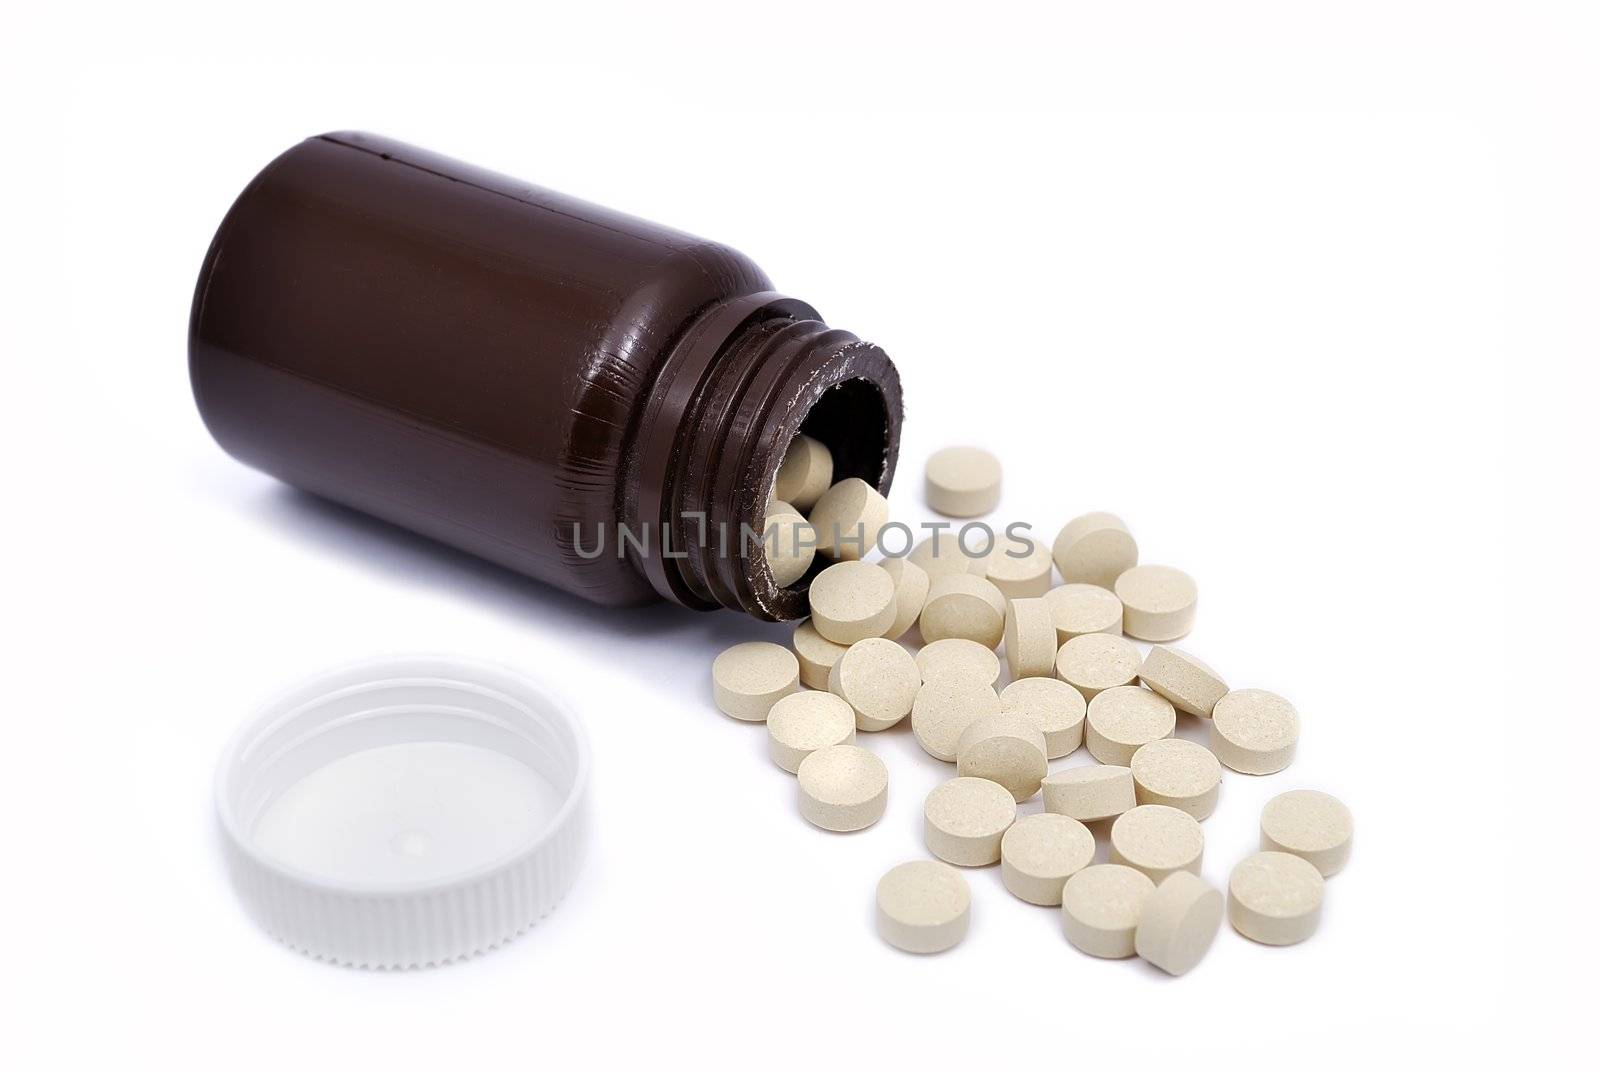 open a jar of pills on white background